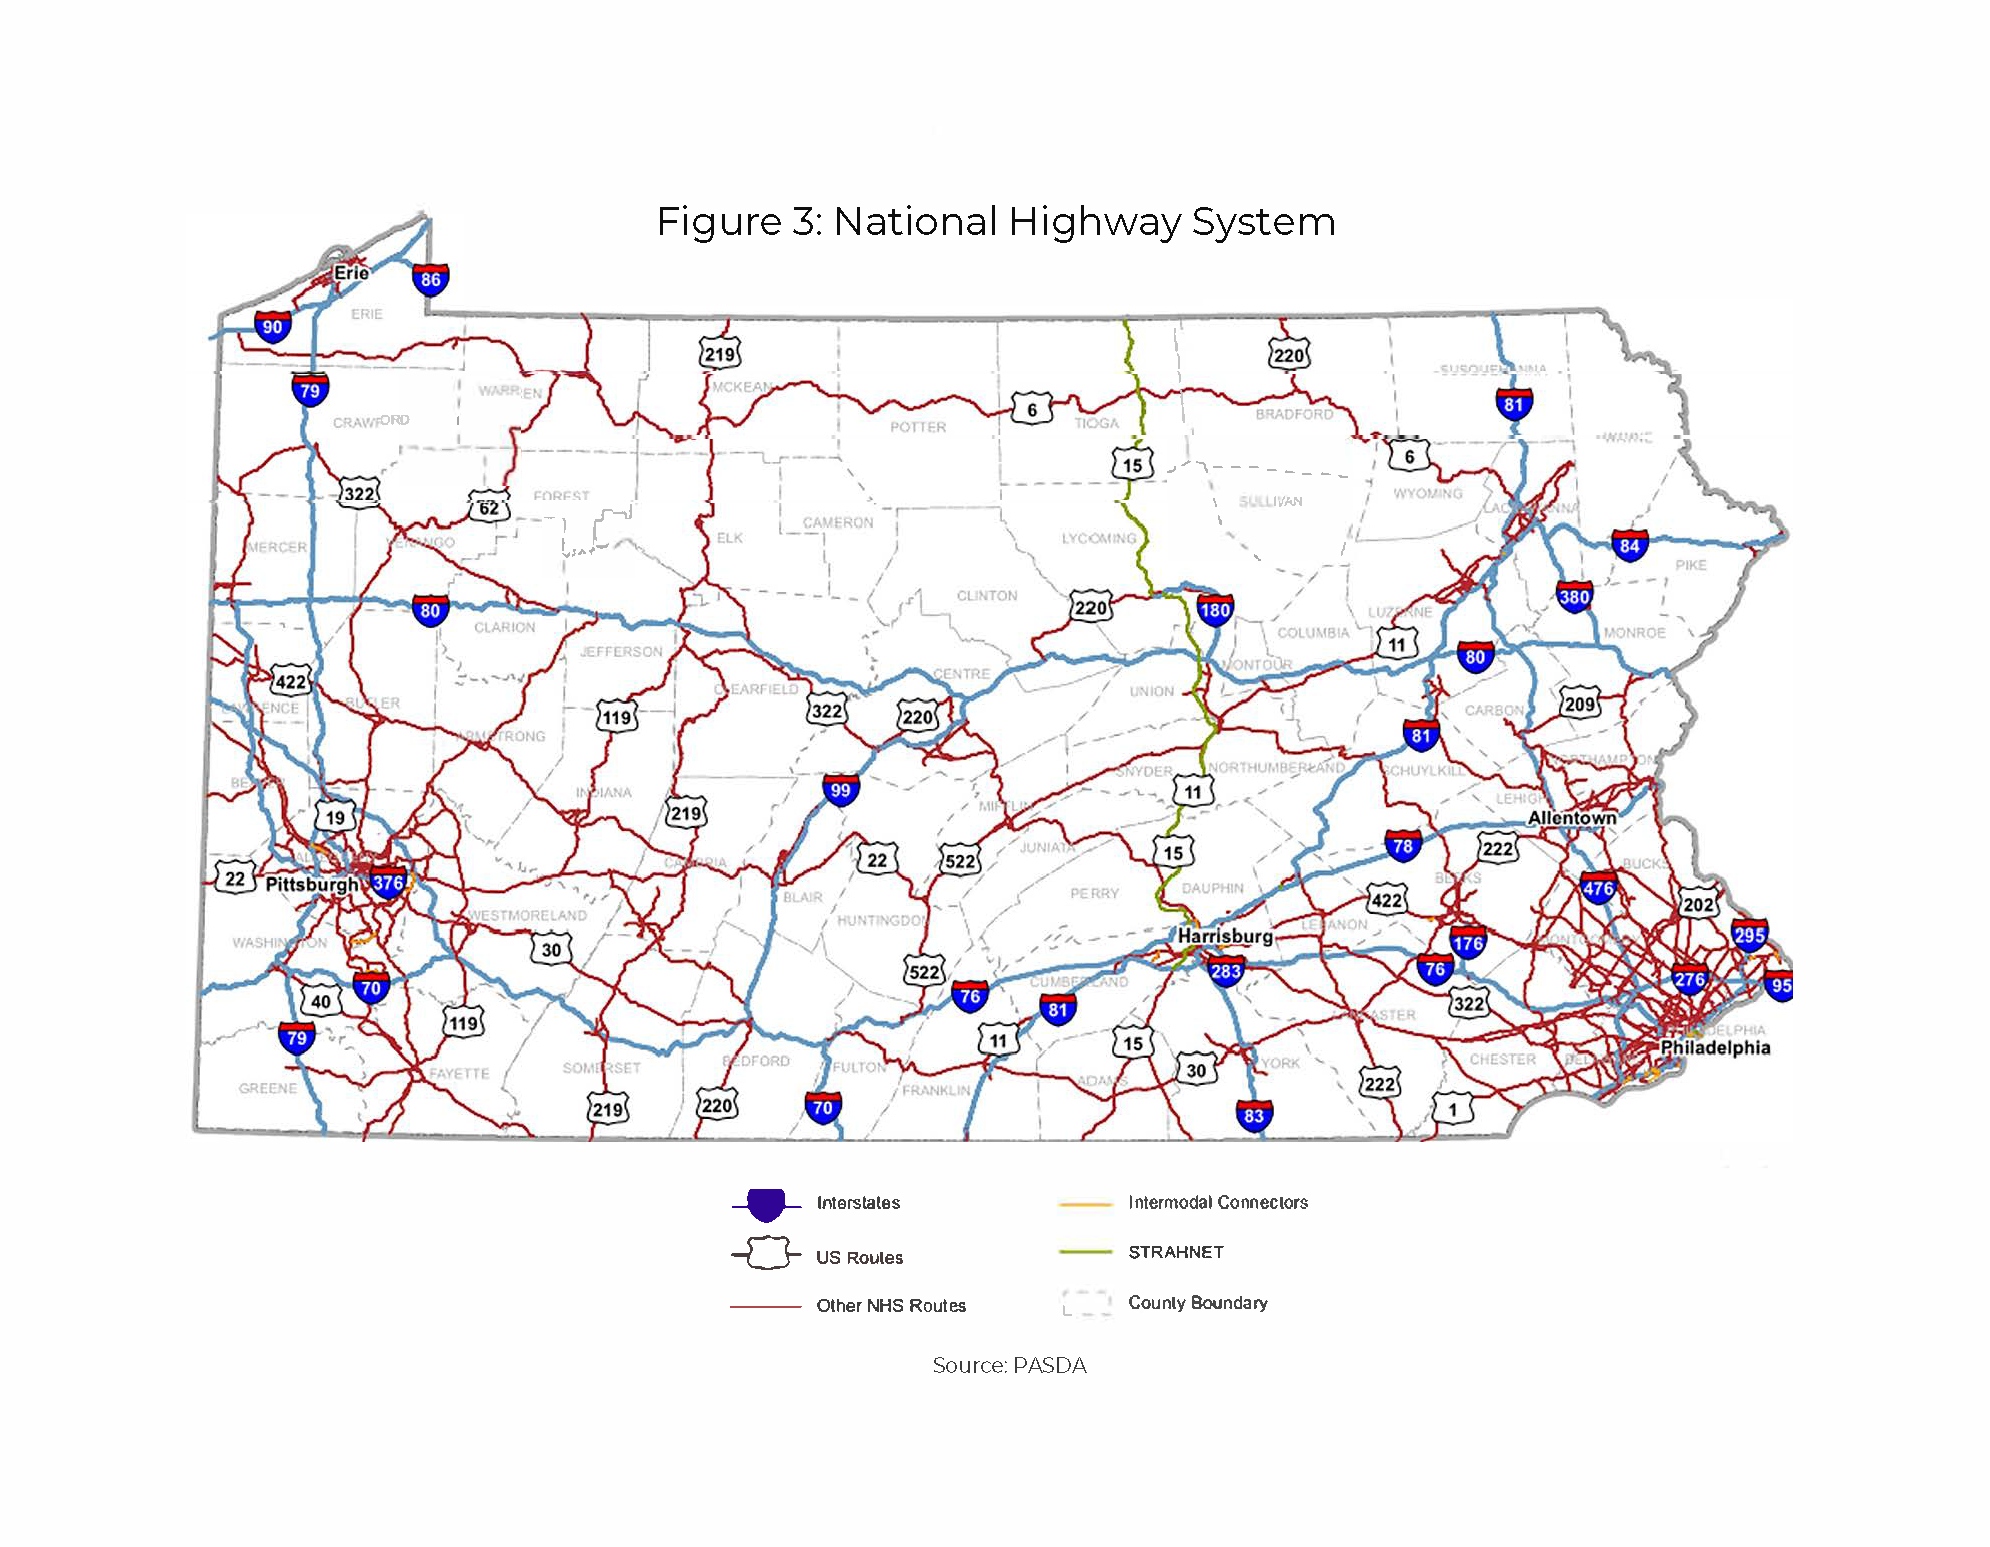 State map of Pennsylvania illustrating the 1,870 miles of interstate highway network miles and the Pennsylvania Turnpike.